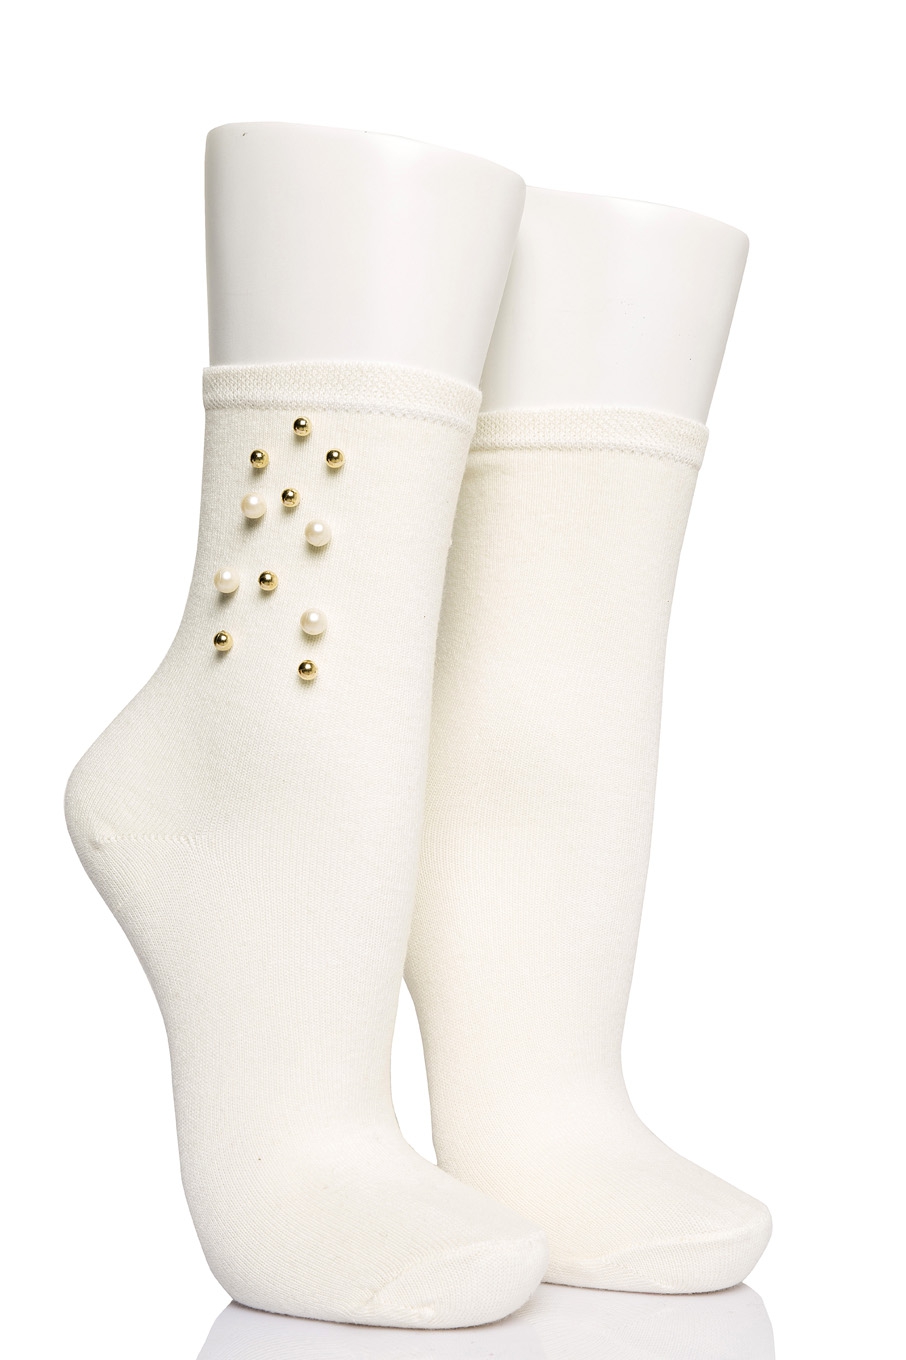 Pamela Boxed, 12 Pieces, Pearly Female Socks